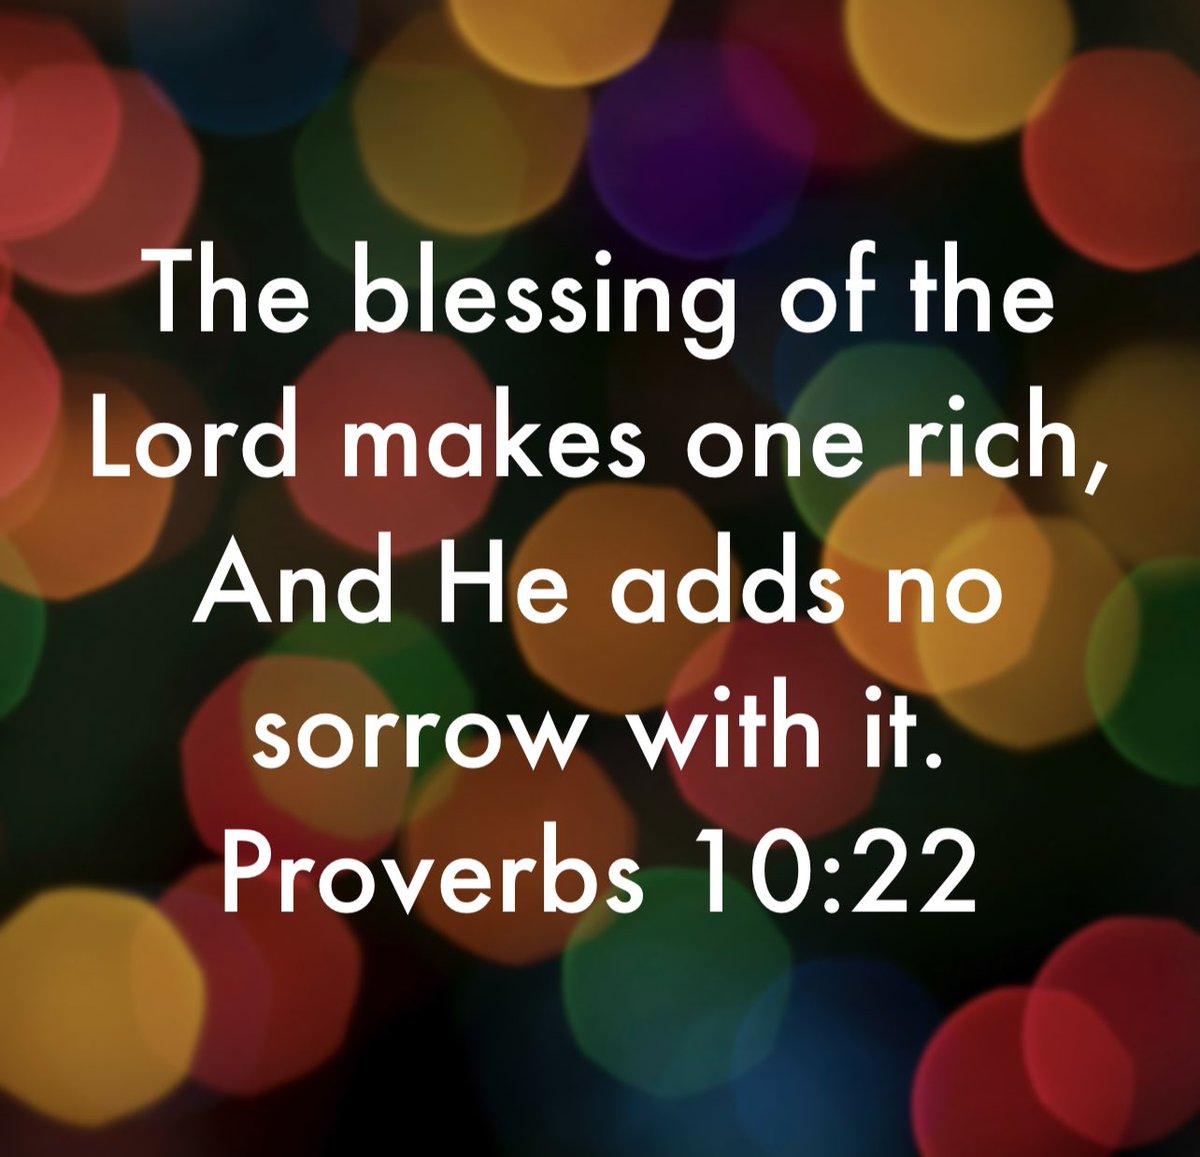 God’s blessing in your life brings wealth WITHOUT sorrow added to it… ❤️❤️

Be patient and faithful. The shortcuts usually come with a high price and sorrow. 

#wordsoflife 
#theblessing